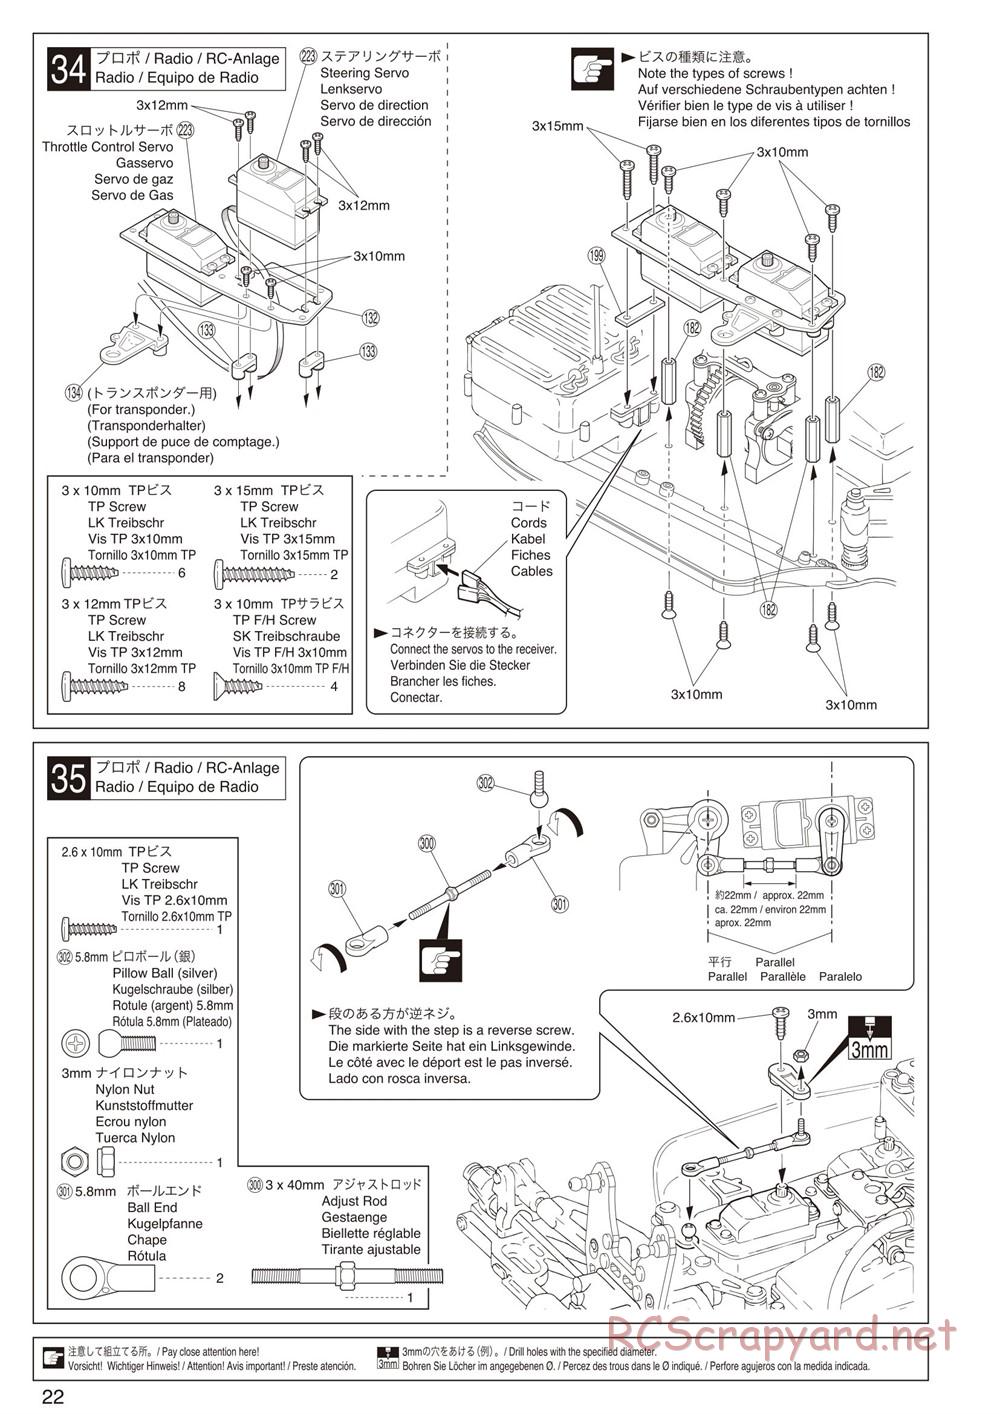 Kyosho - Inferno Neo 2.0 - Manual - Page 22